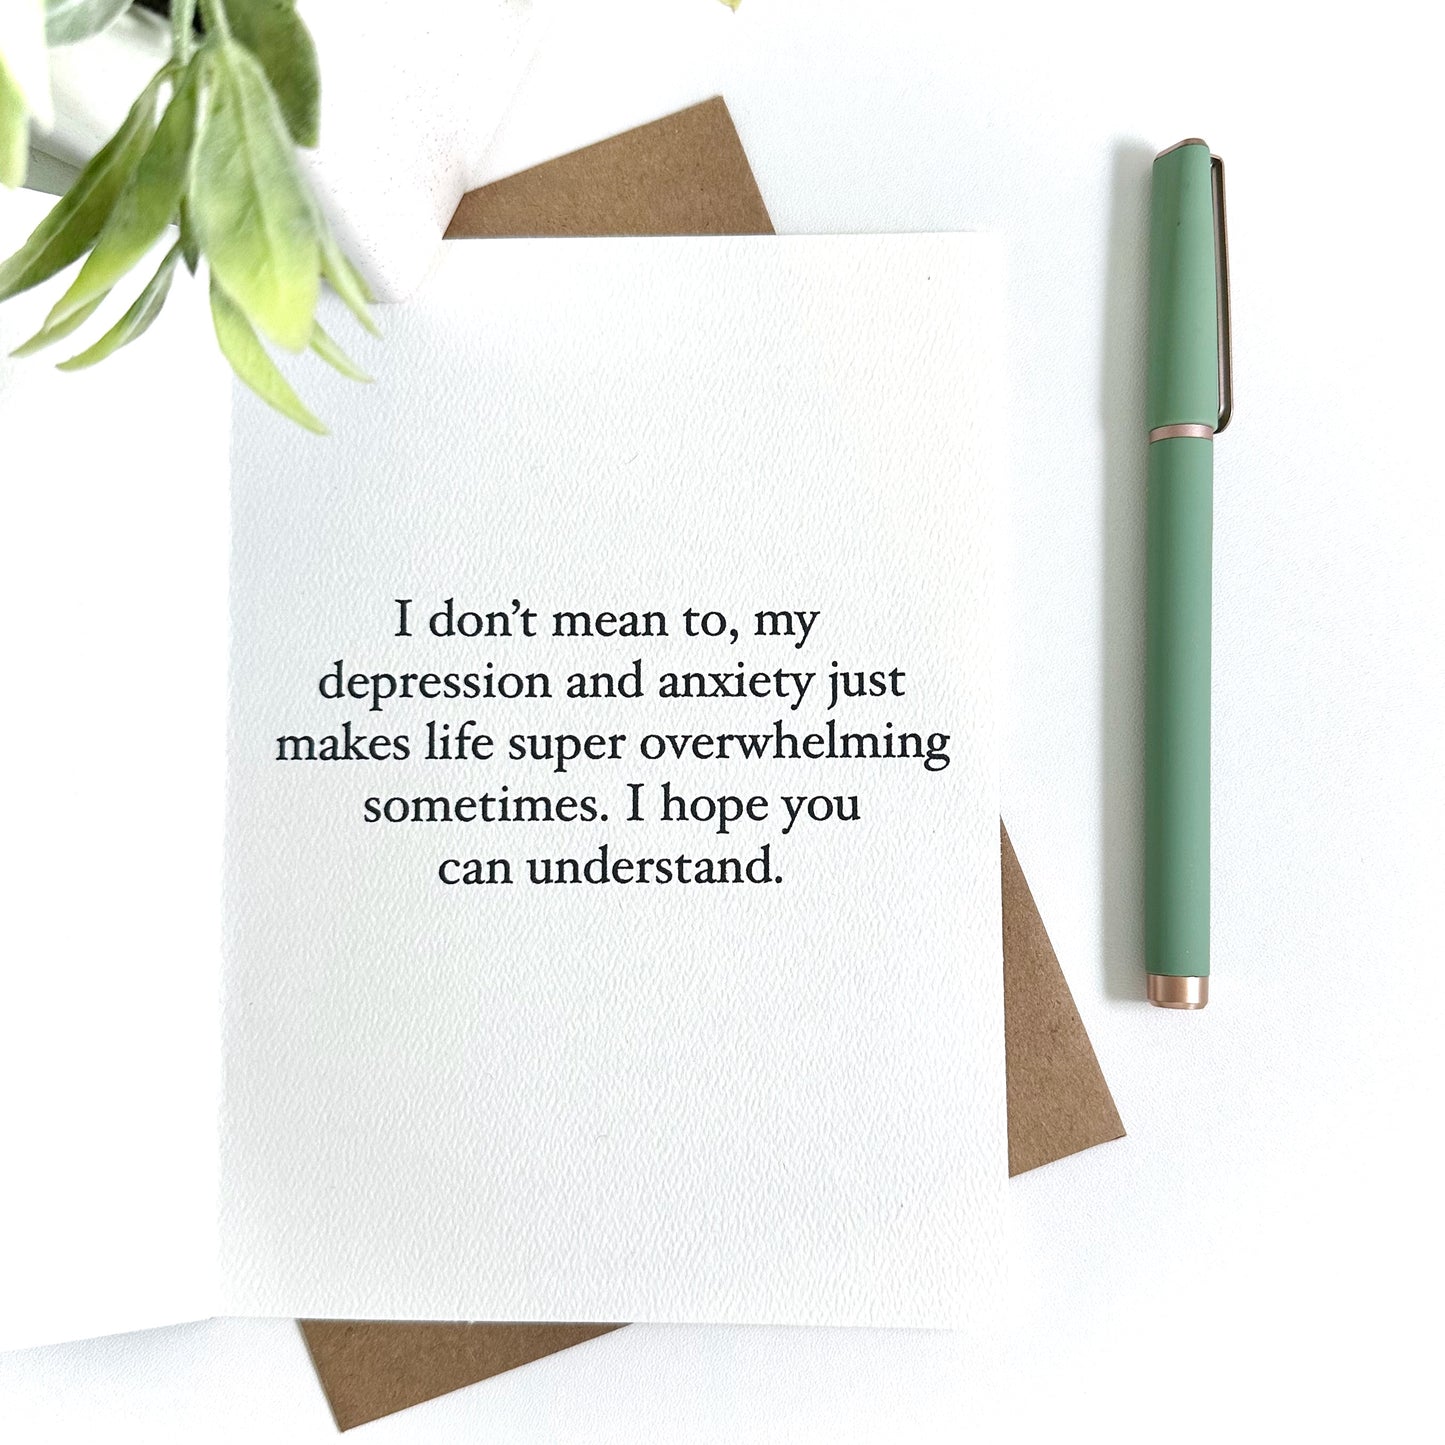 Coping with Depression and Anxiety Apology Greeting Card